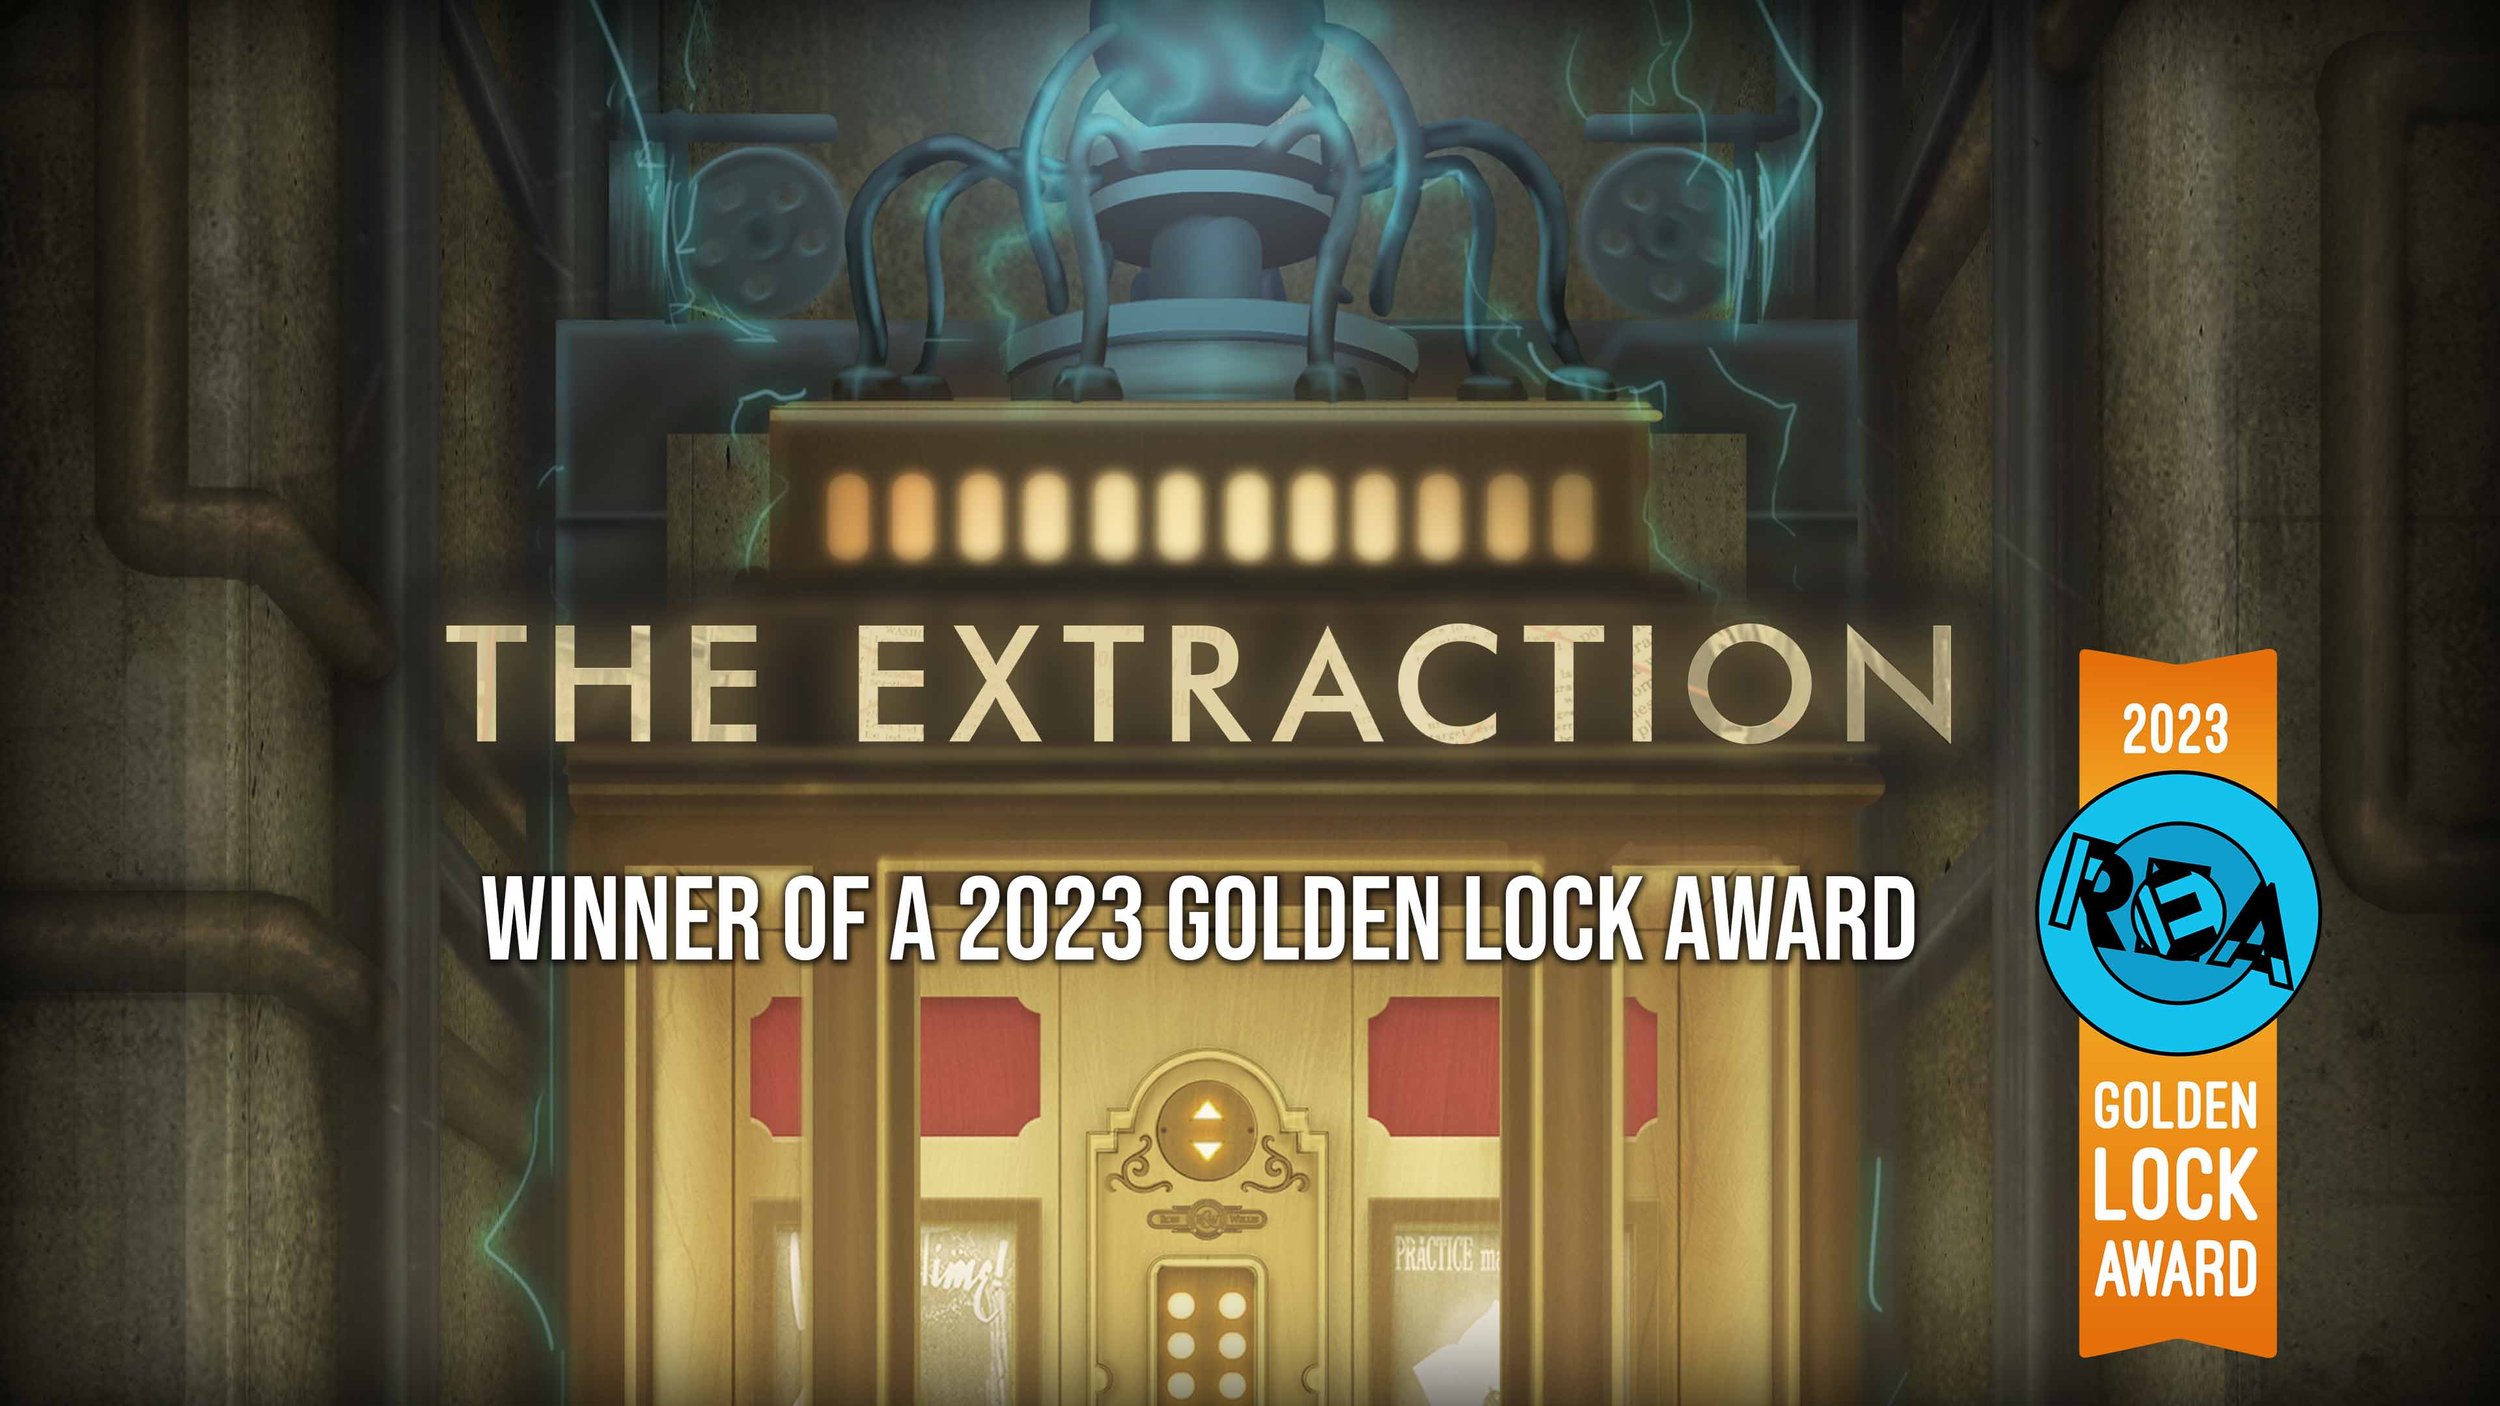 Web Promotion - The Extraction 2023 Golden Lock.jpg